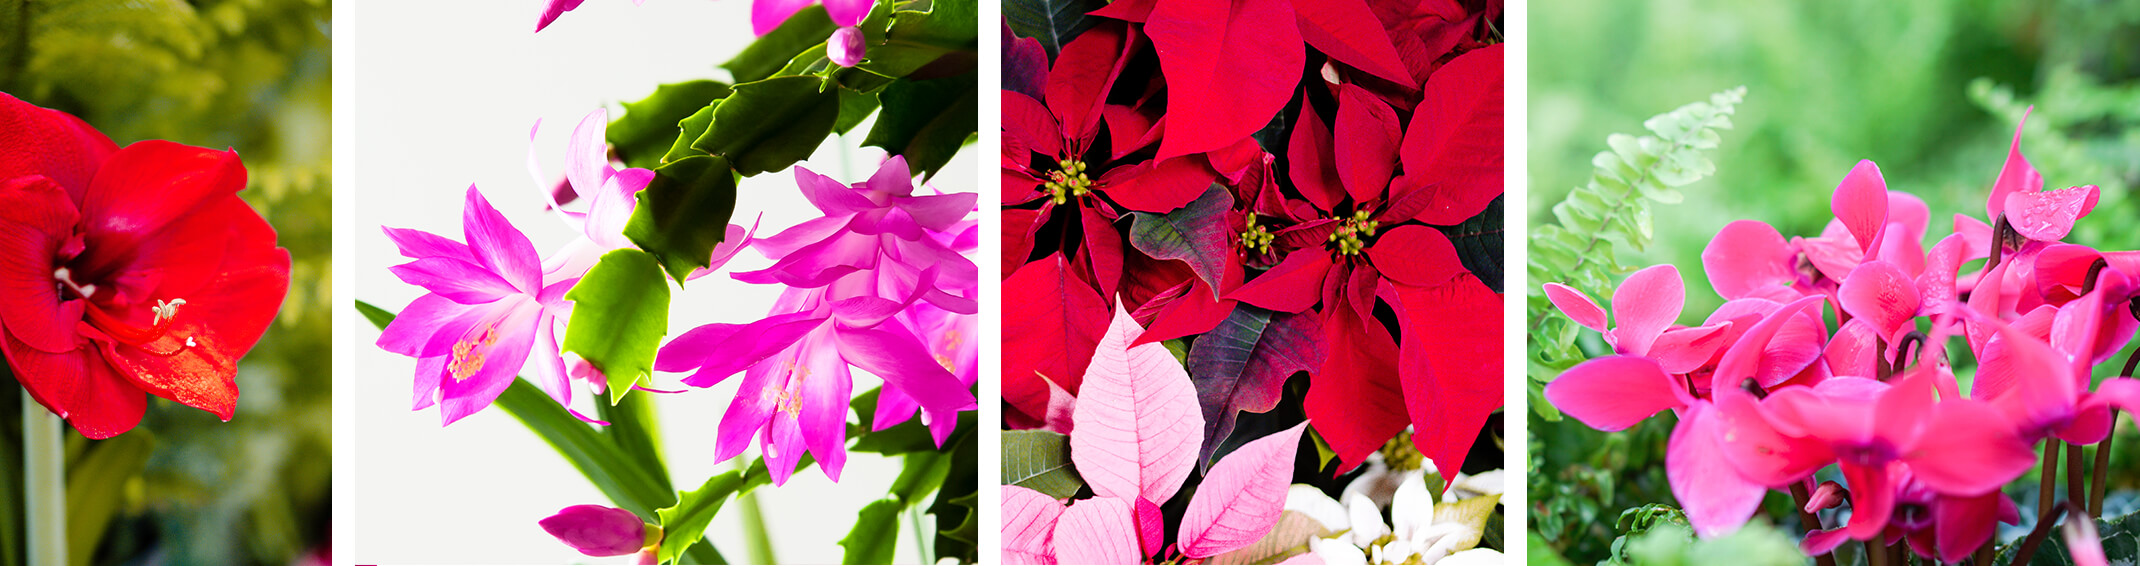 4 images: a closeup of a red amaryllis in bloom; a pink Thanksgiving Cactus plant; red, pink and white poinsettias; and a pink cyclamen with ferns in the background